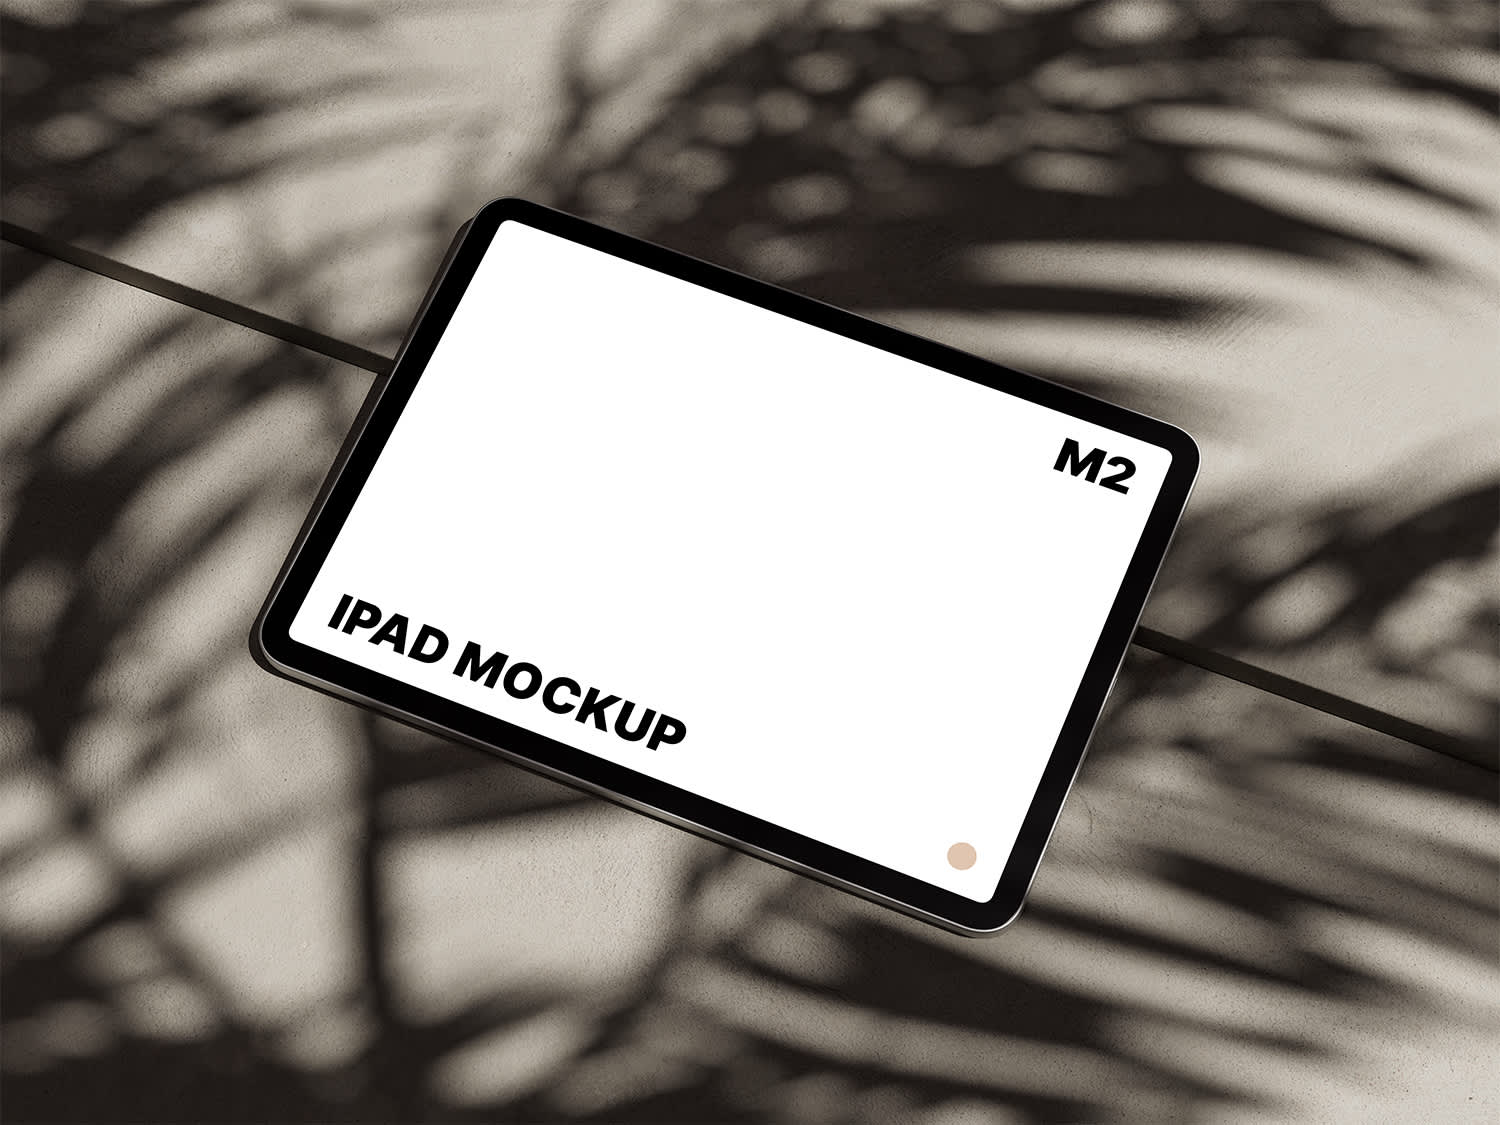 M2 iPad Pro on Concrete Mockup by Anthony Boyd Graphics